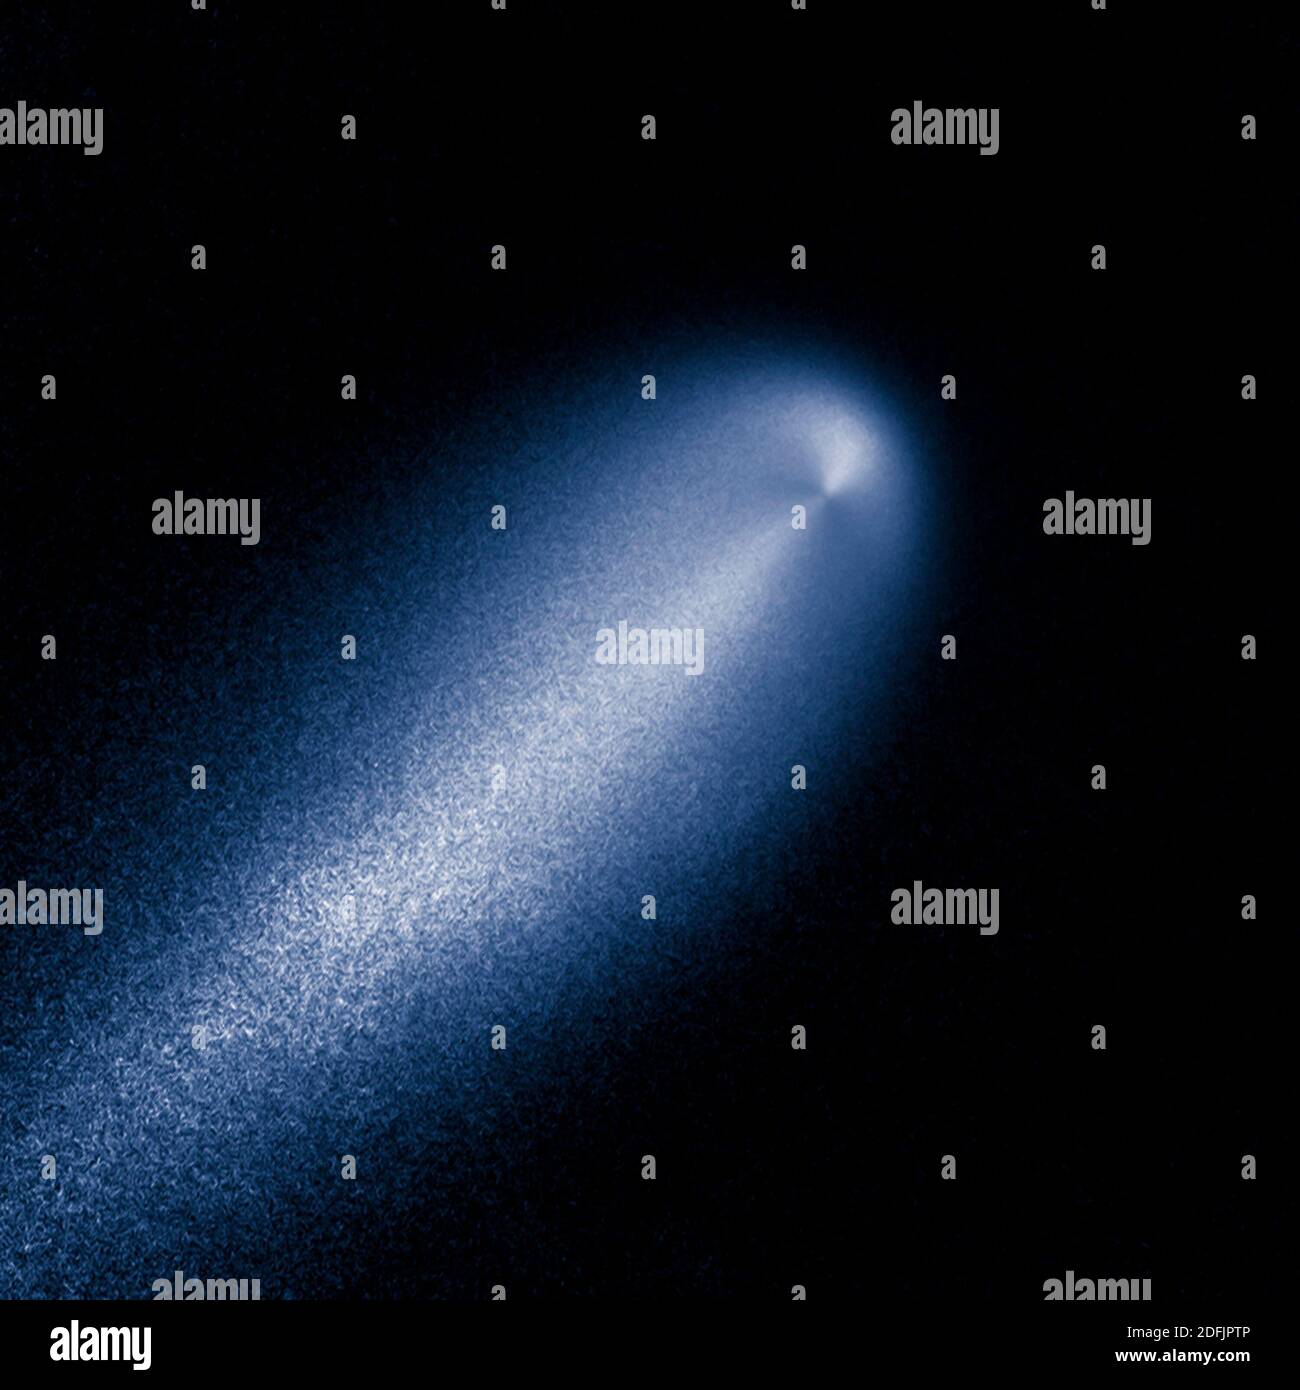 This is a contrast-enhanced image produced from the Hubble images of Comet C/2012 S1 (ISON) to reveal the subtle structure in the inner coma of the co Stock Photo